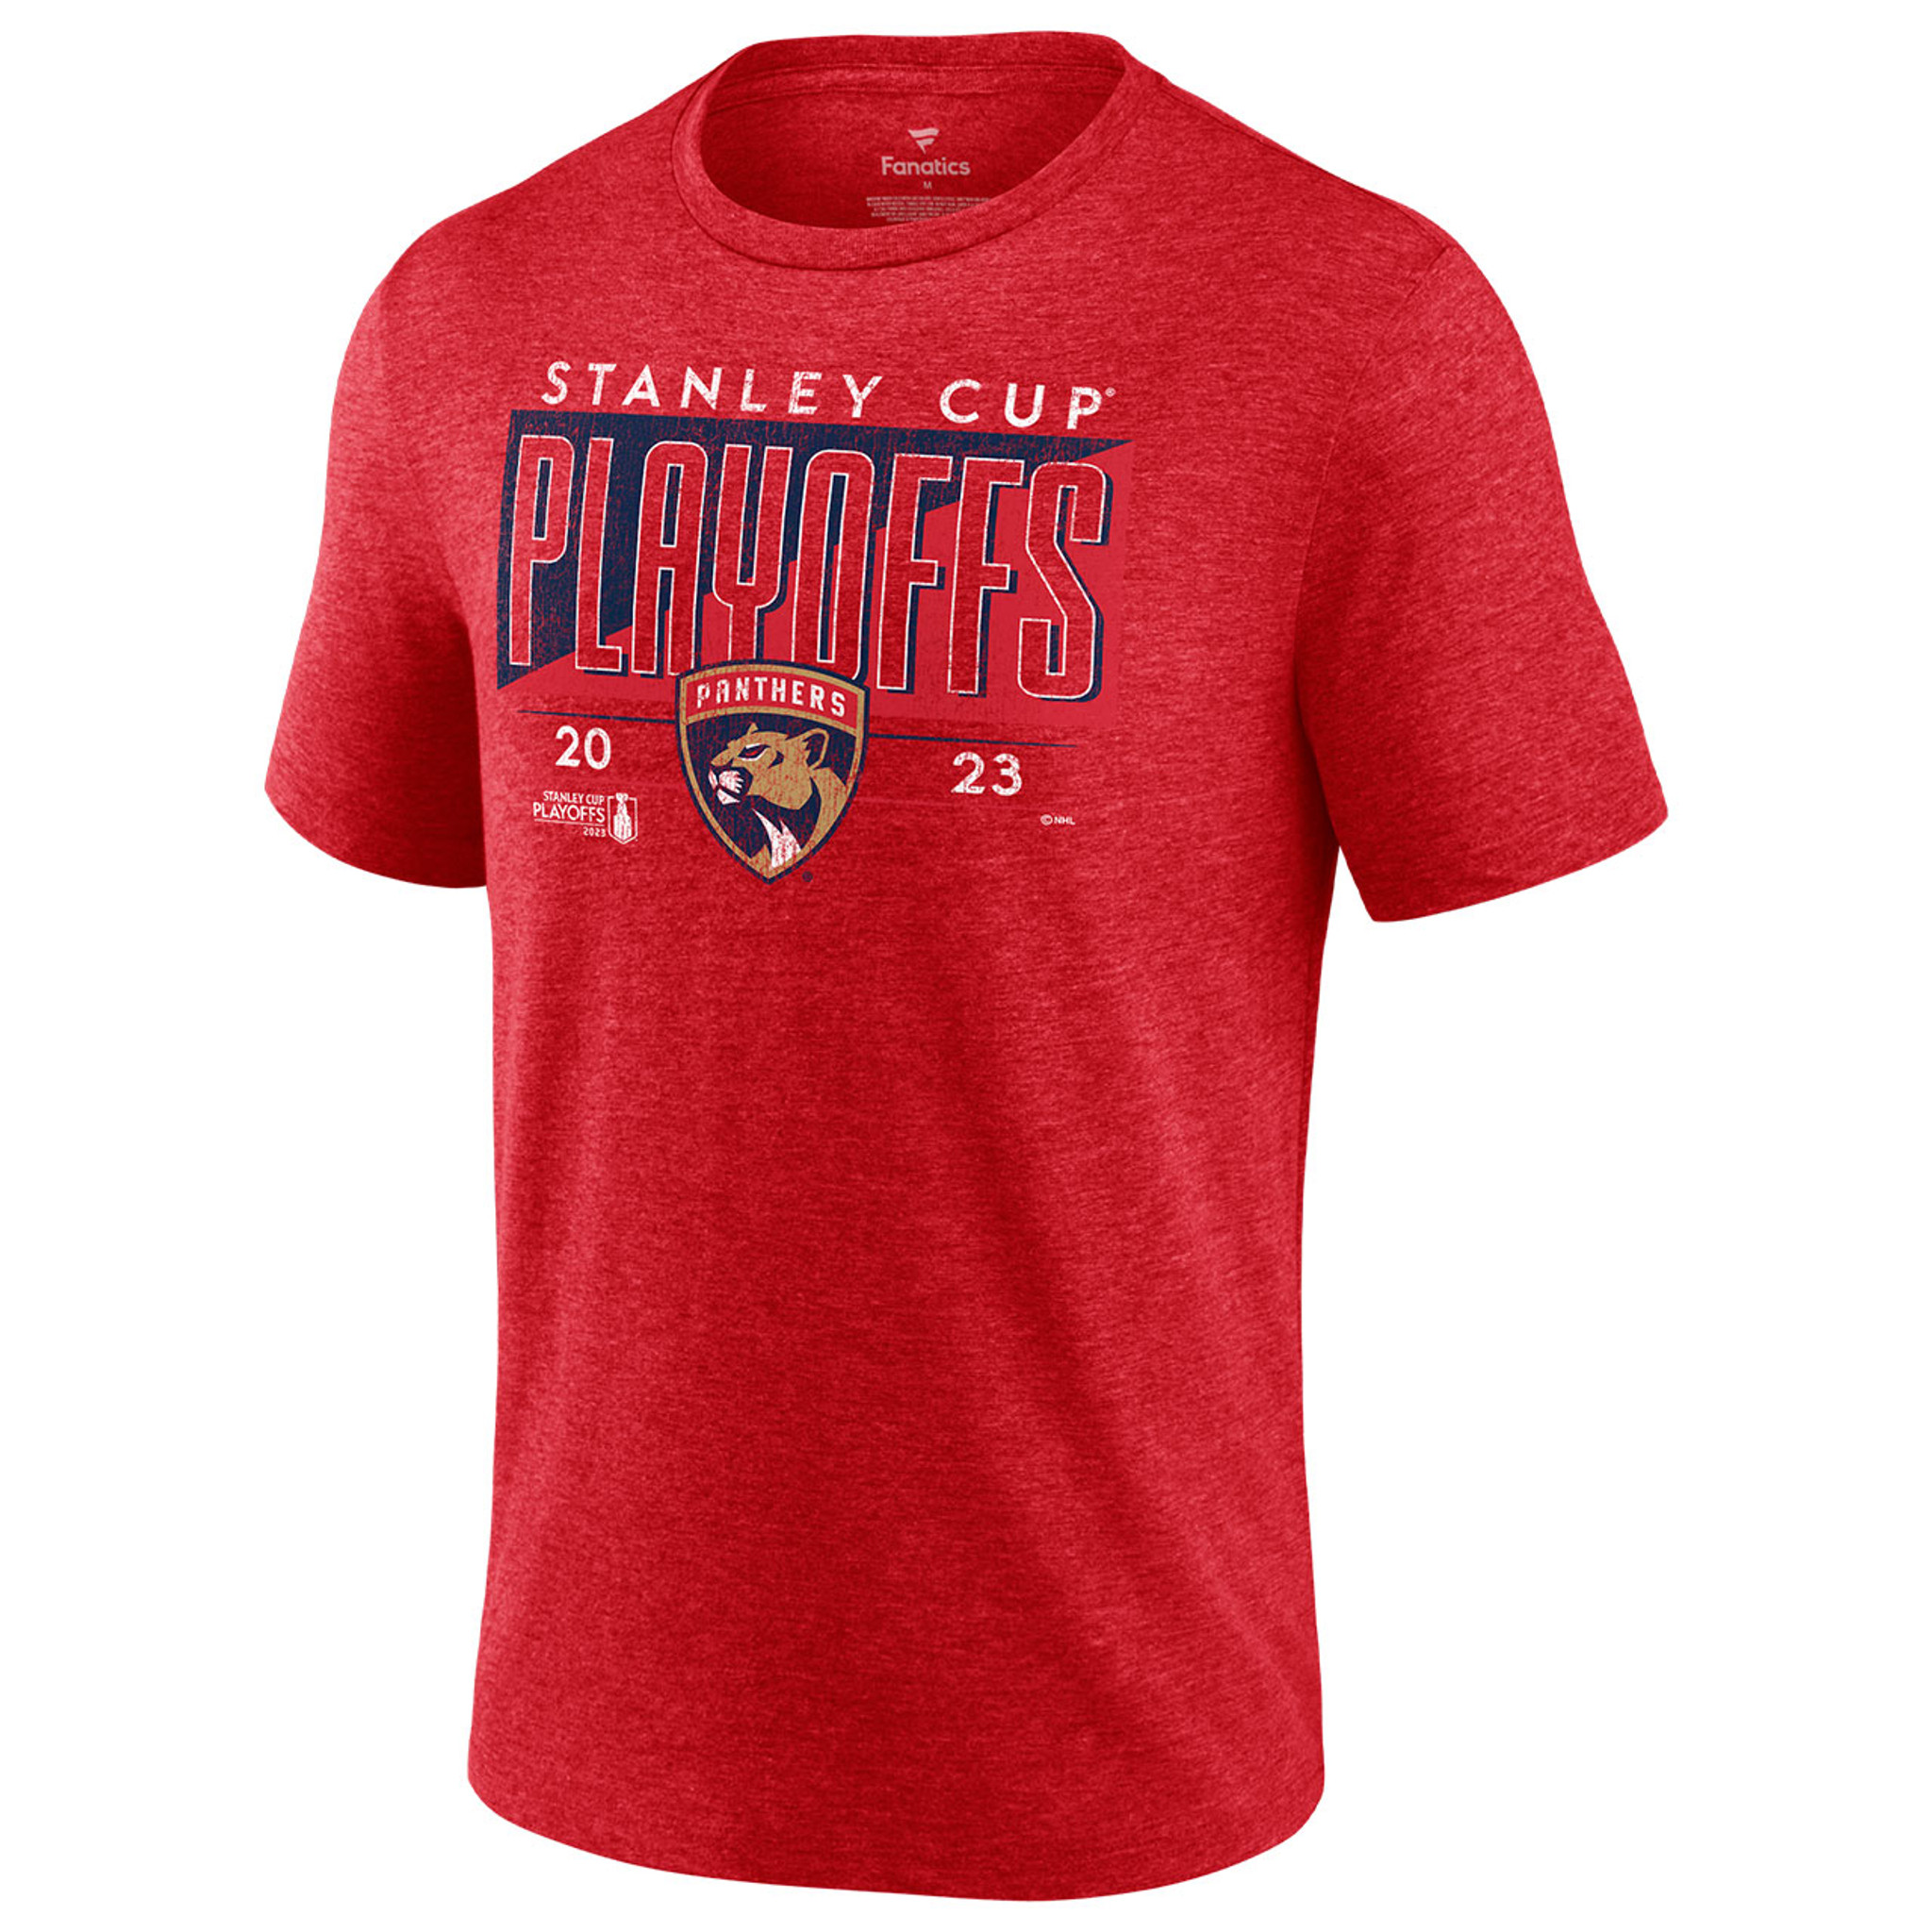 Florida Panthers 2023 Stanley Cup Playoff Never Out Of The Fight Shirt,  hoodie, sweater, long sleeve and tank top